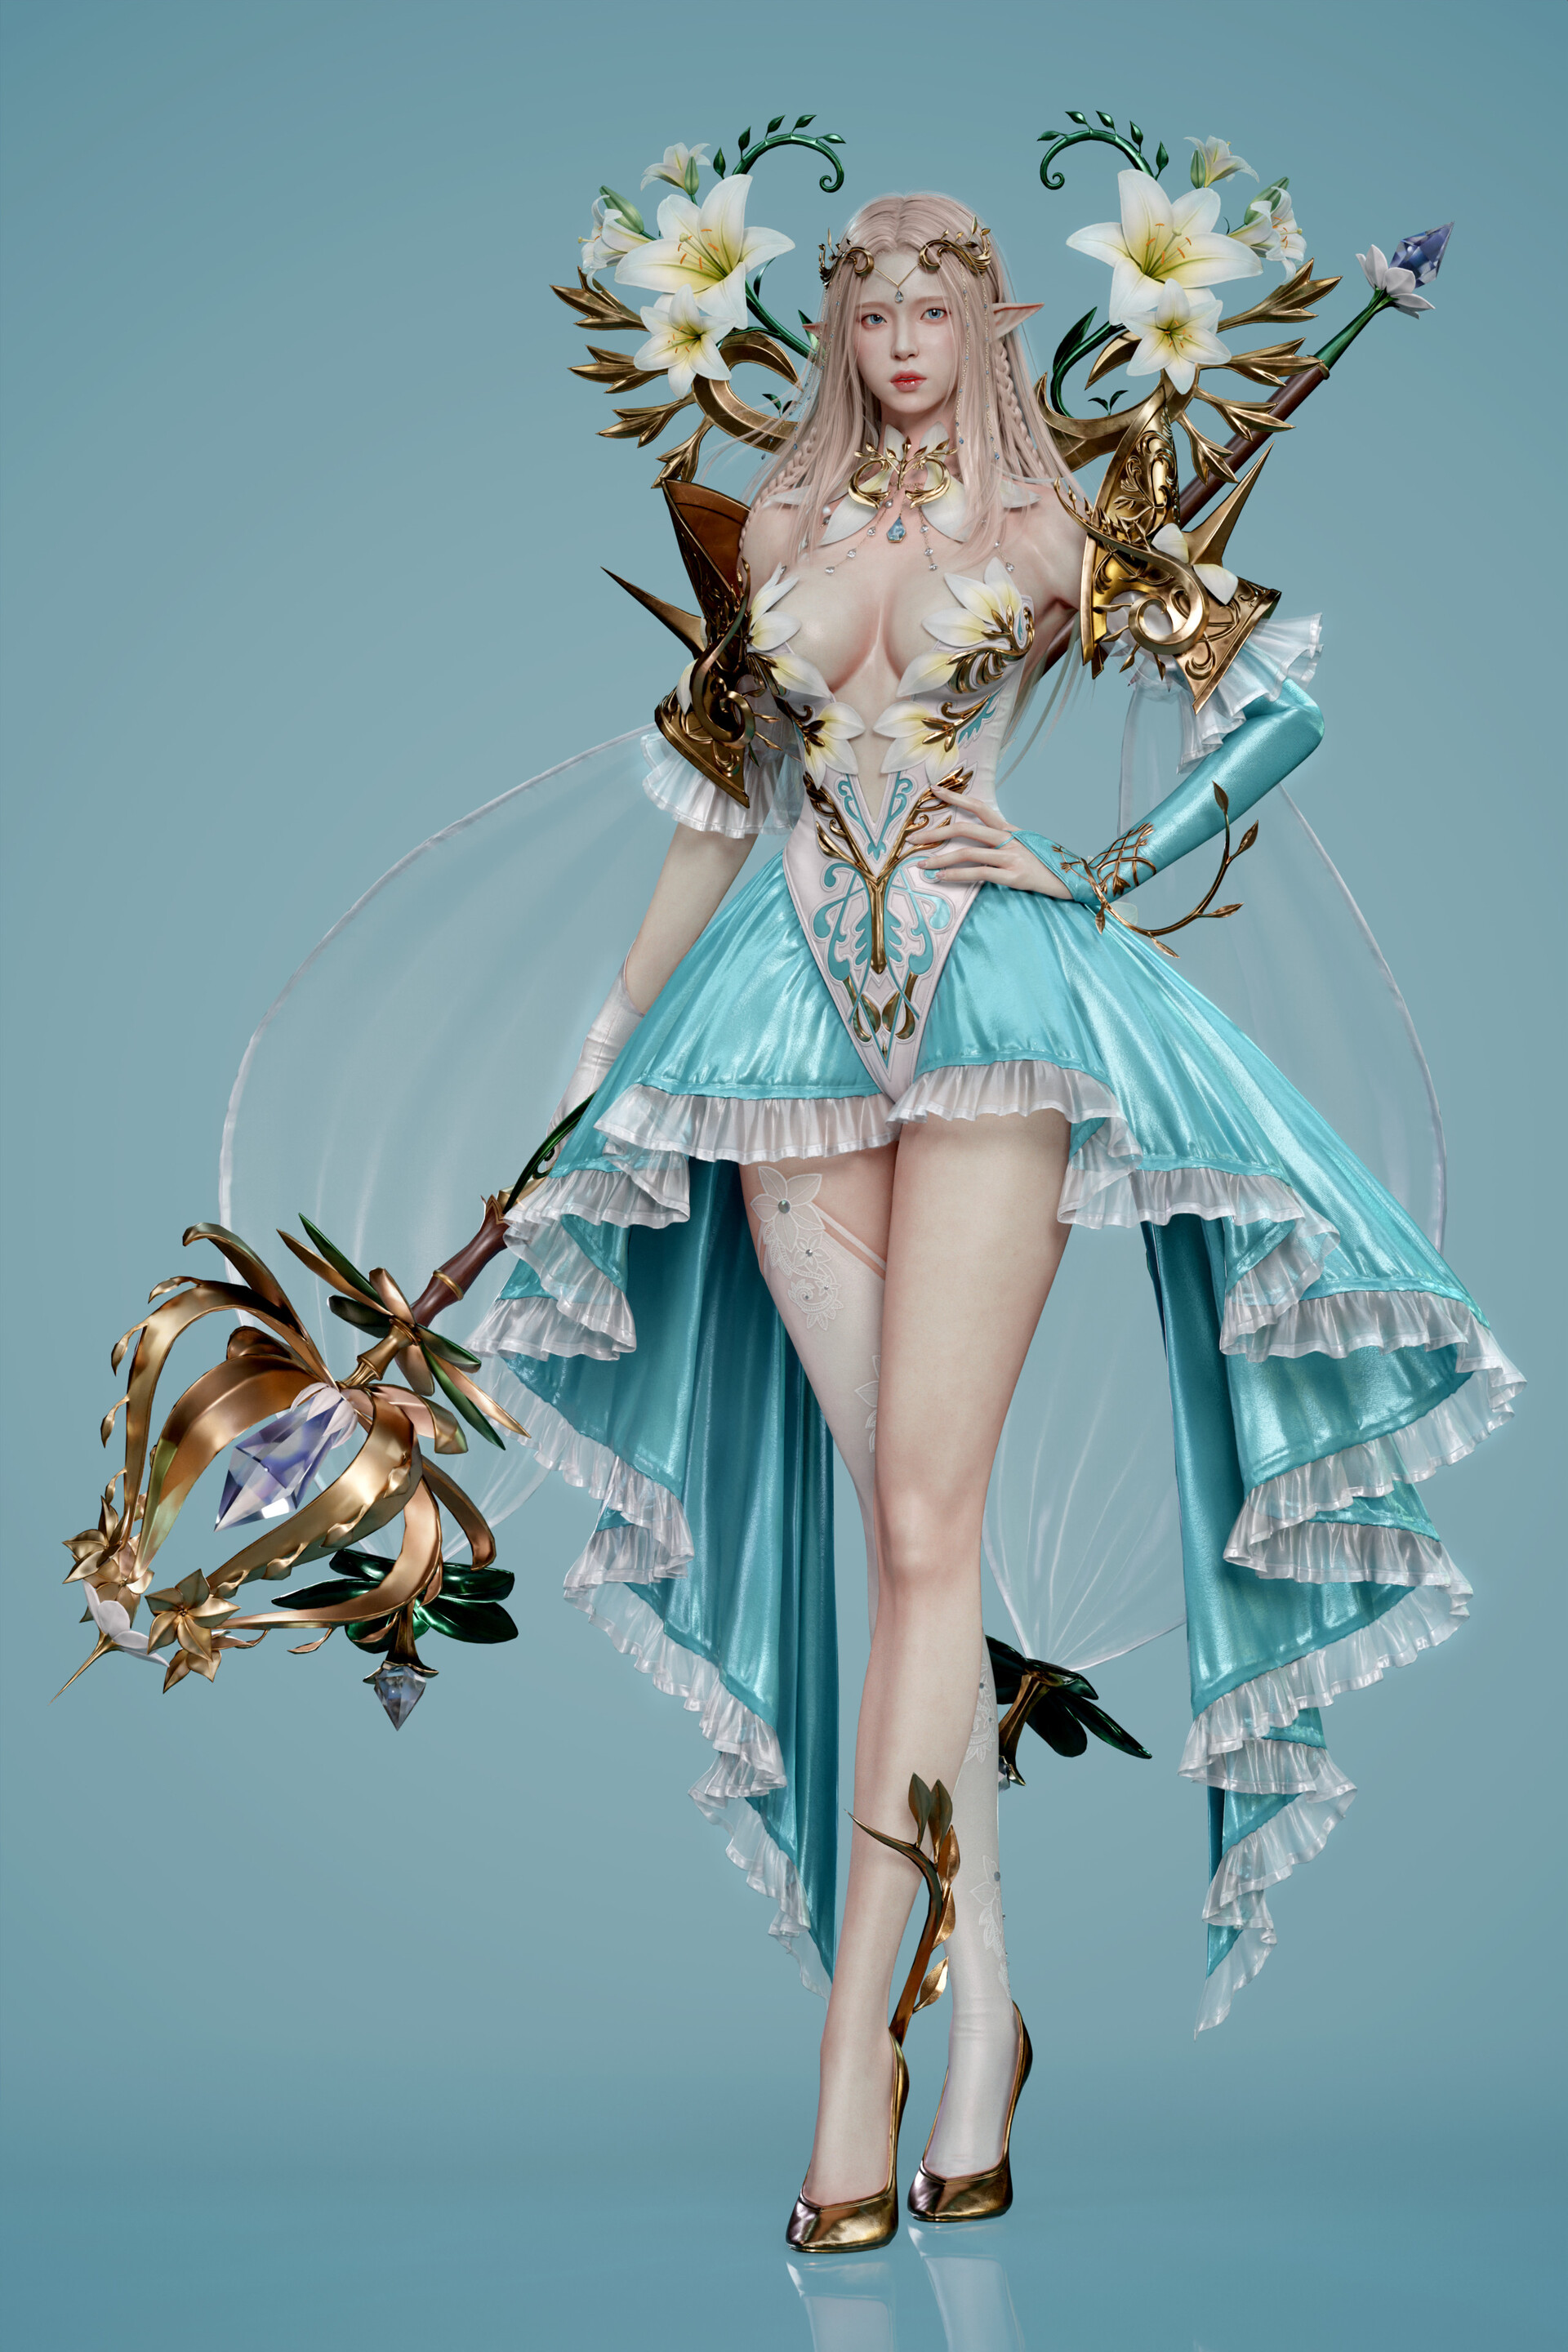 General 1920x2880 Kim Subeen women blonde magician dress portrait display simple background CGI digital art cyan parted lips juicy lips pointy ears braids flowers hands on hips hair ornament standing bare shoulders boobs staff